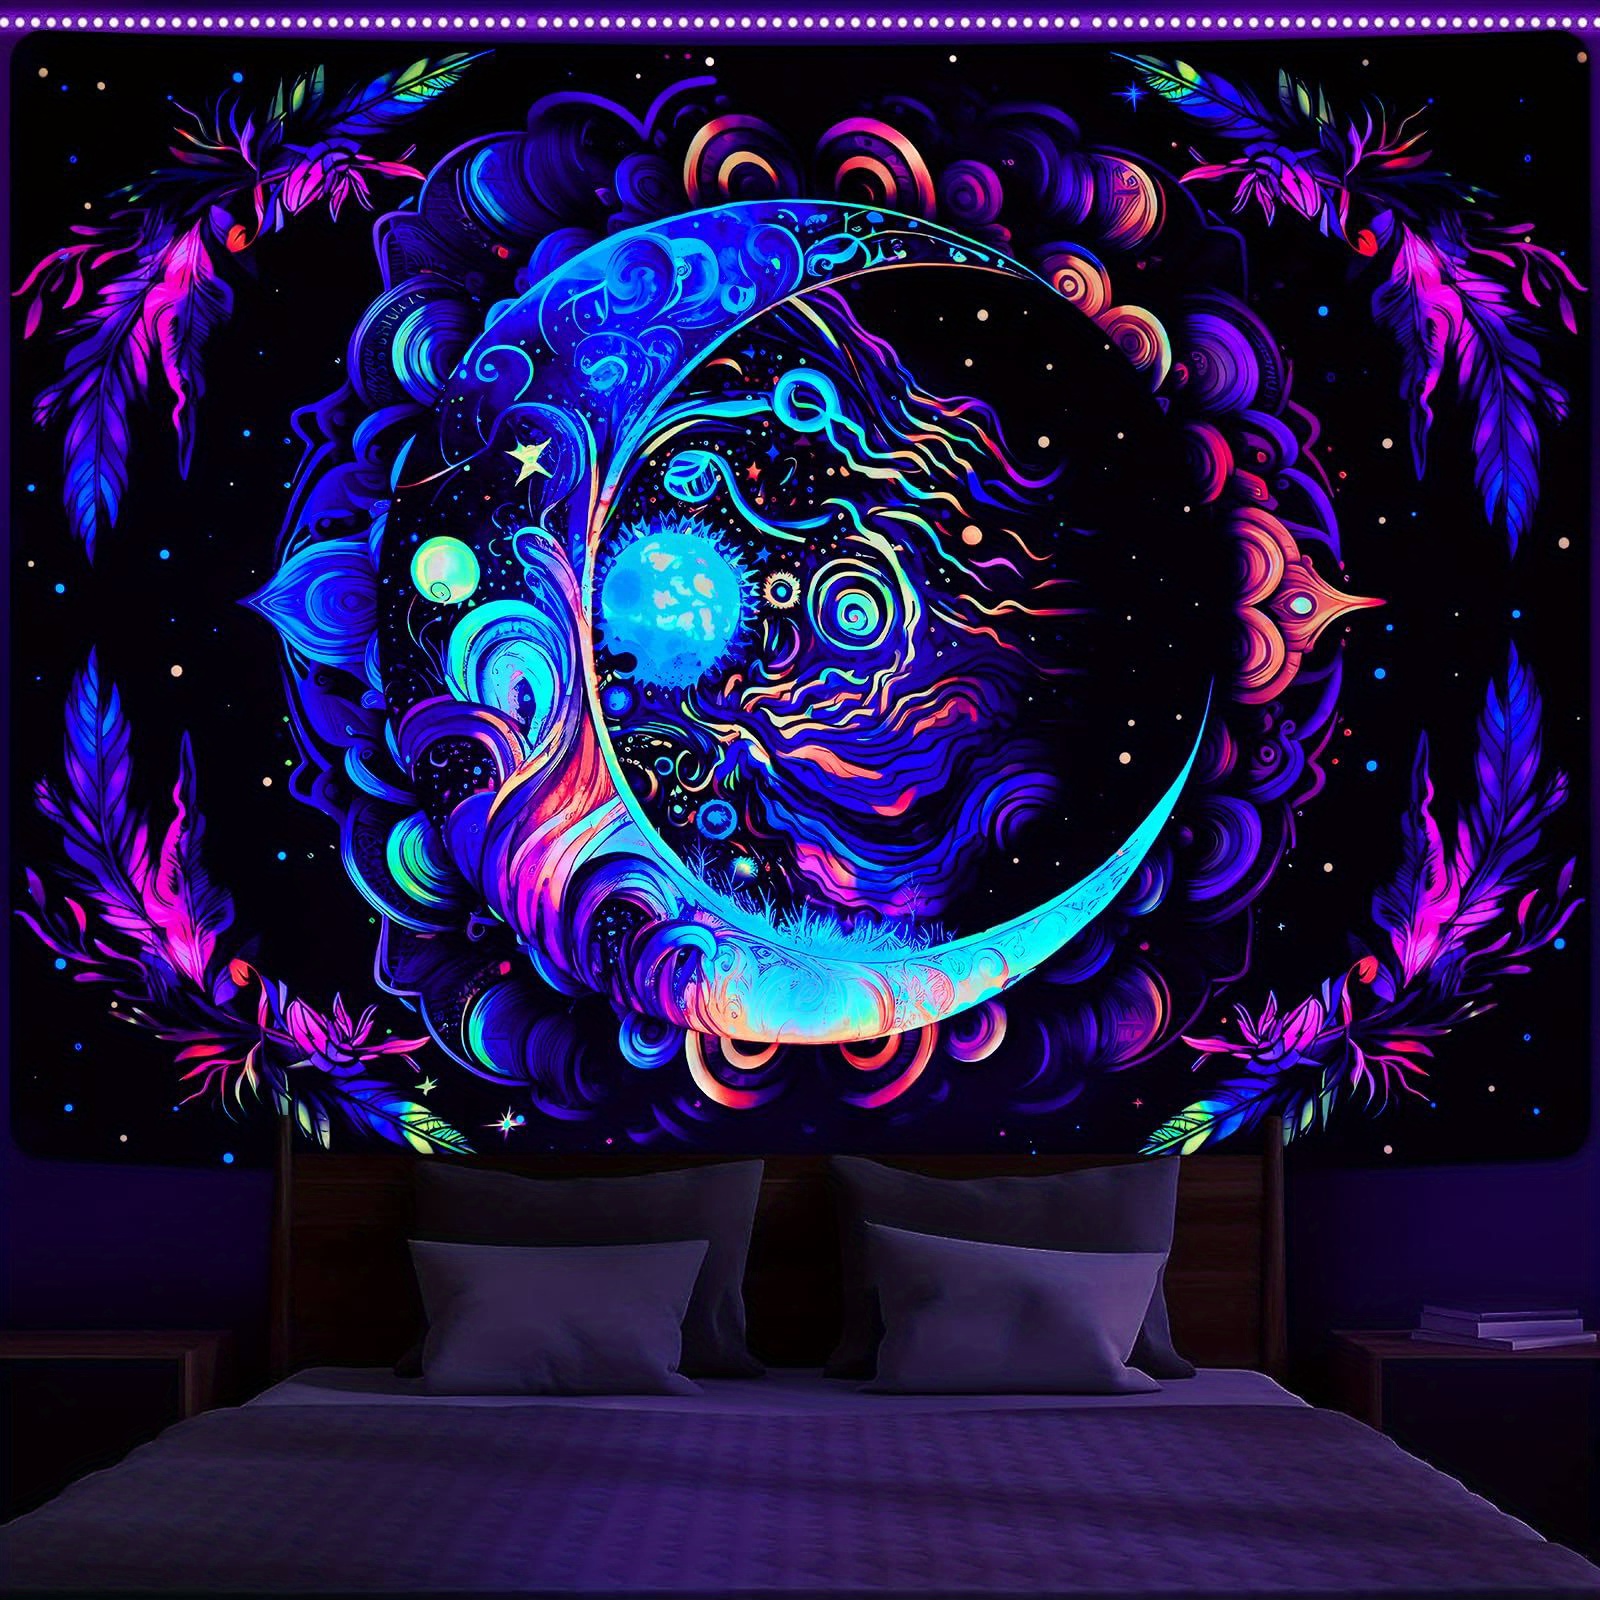 

Uv Reactive Blacklight Tapestry - Bohemian Design - Mysterious Aesthetic Boho Wall Hanging - Polyester Knit Fabric - No Electricity Required - People Theme With Plaid Pattern - Transverse Orientation